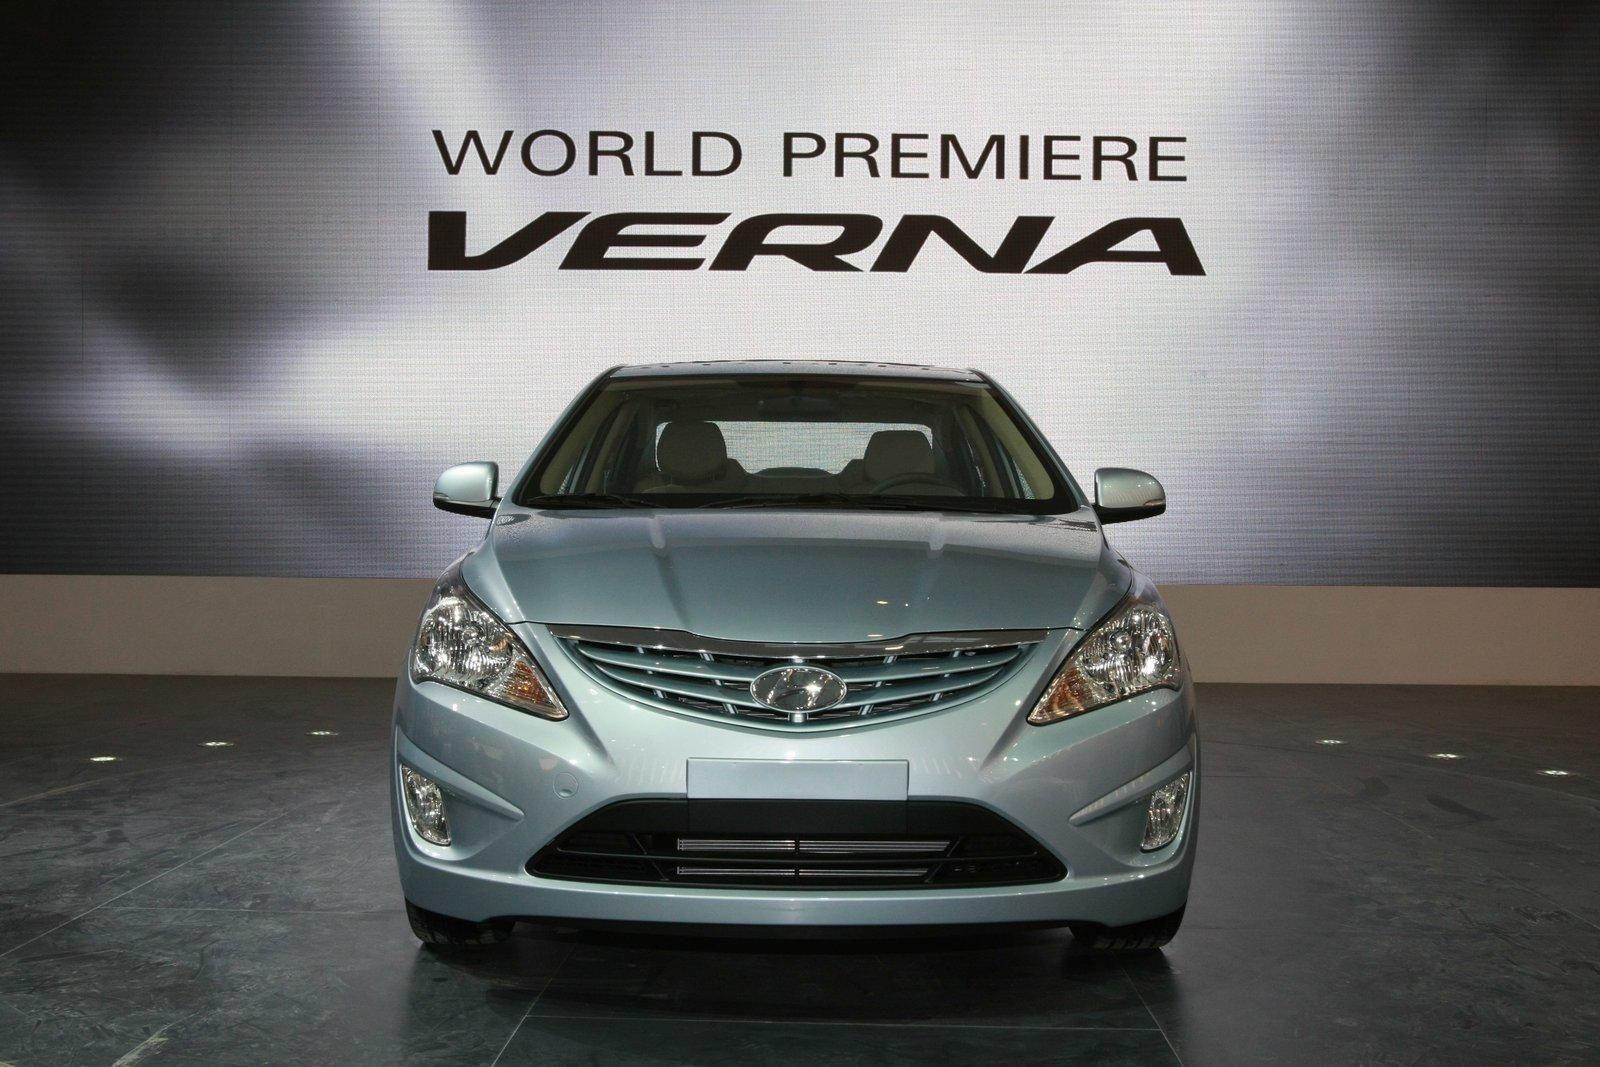 Car Wallpaper Gallery: 2011 Hyundai Verna (Accent) Picture